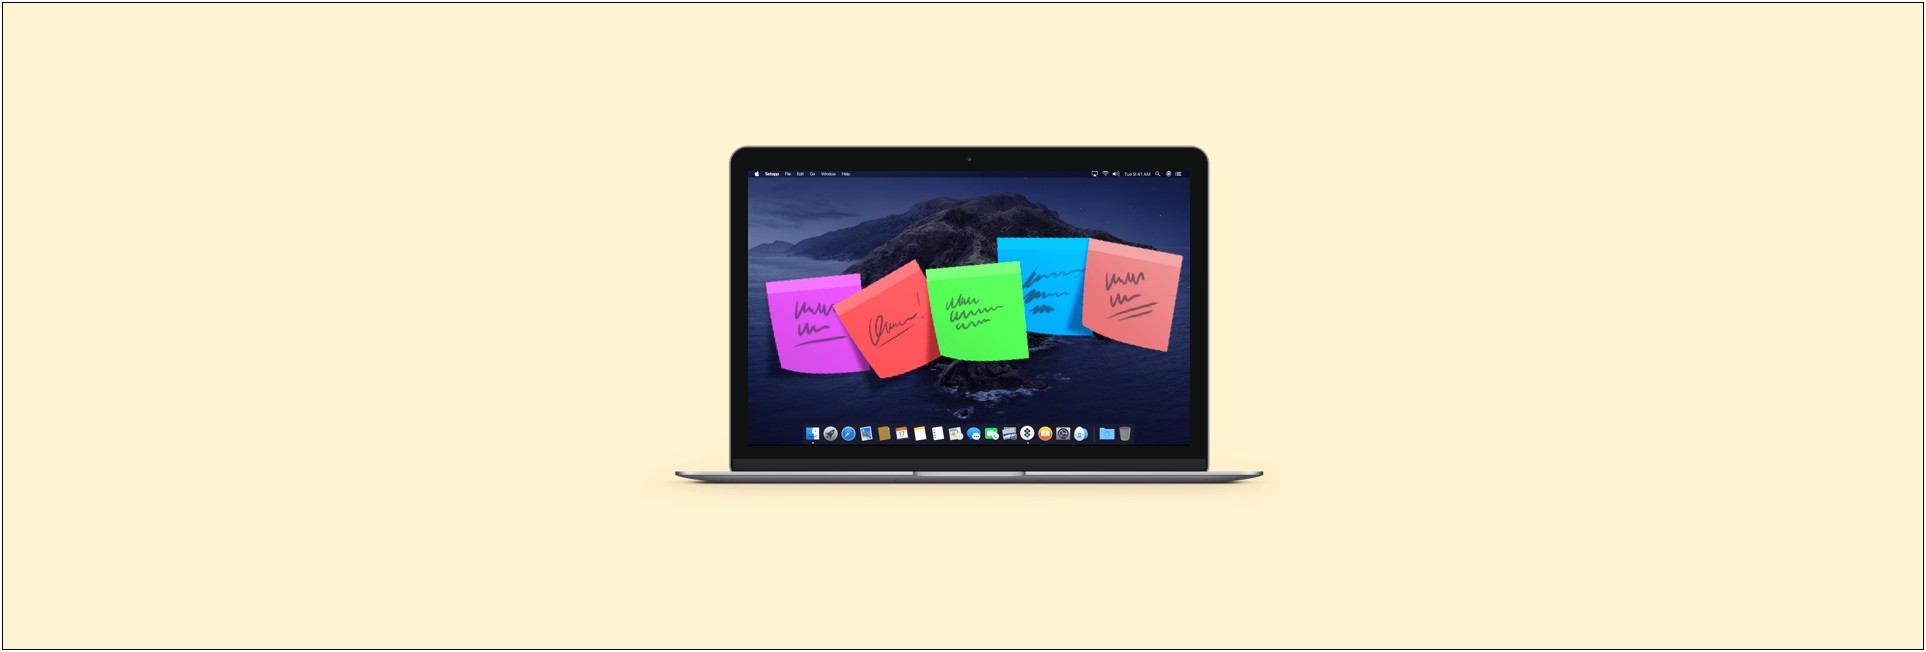 Free Flash Card Template For Mac